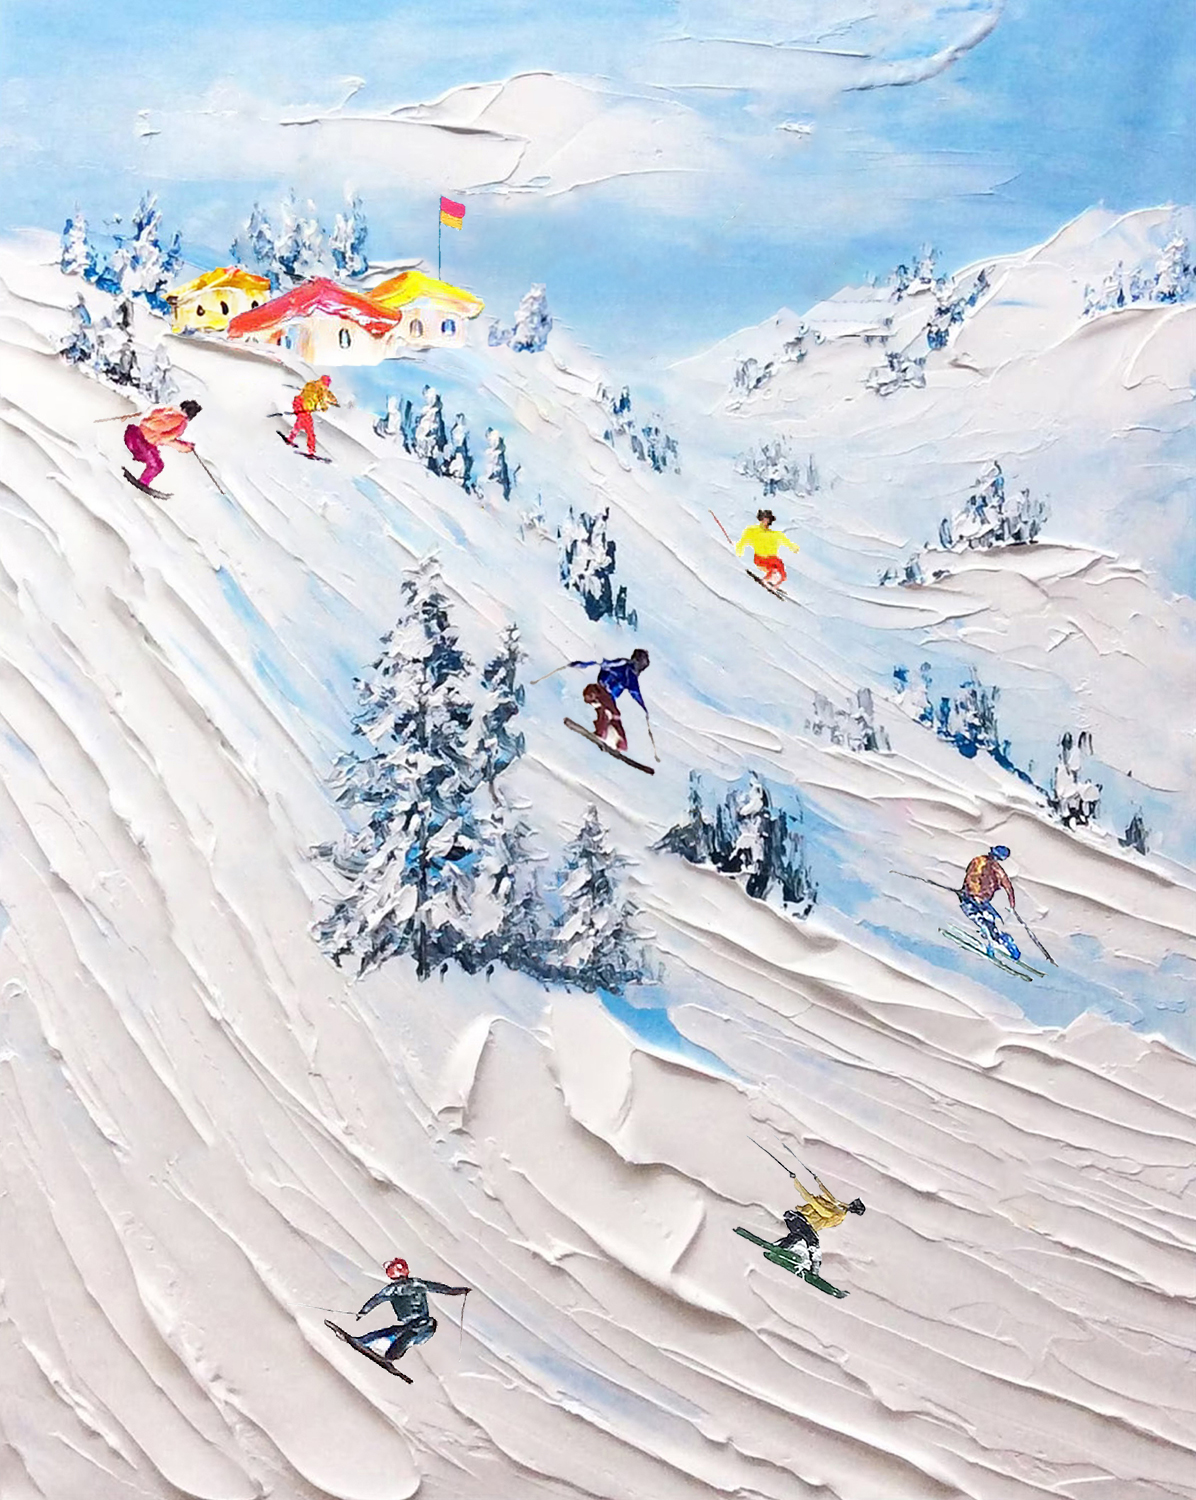 Skier on Snowy Mountain Wall Art Sport White Snow Skiing Cottage by Knife Oil Paintings